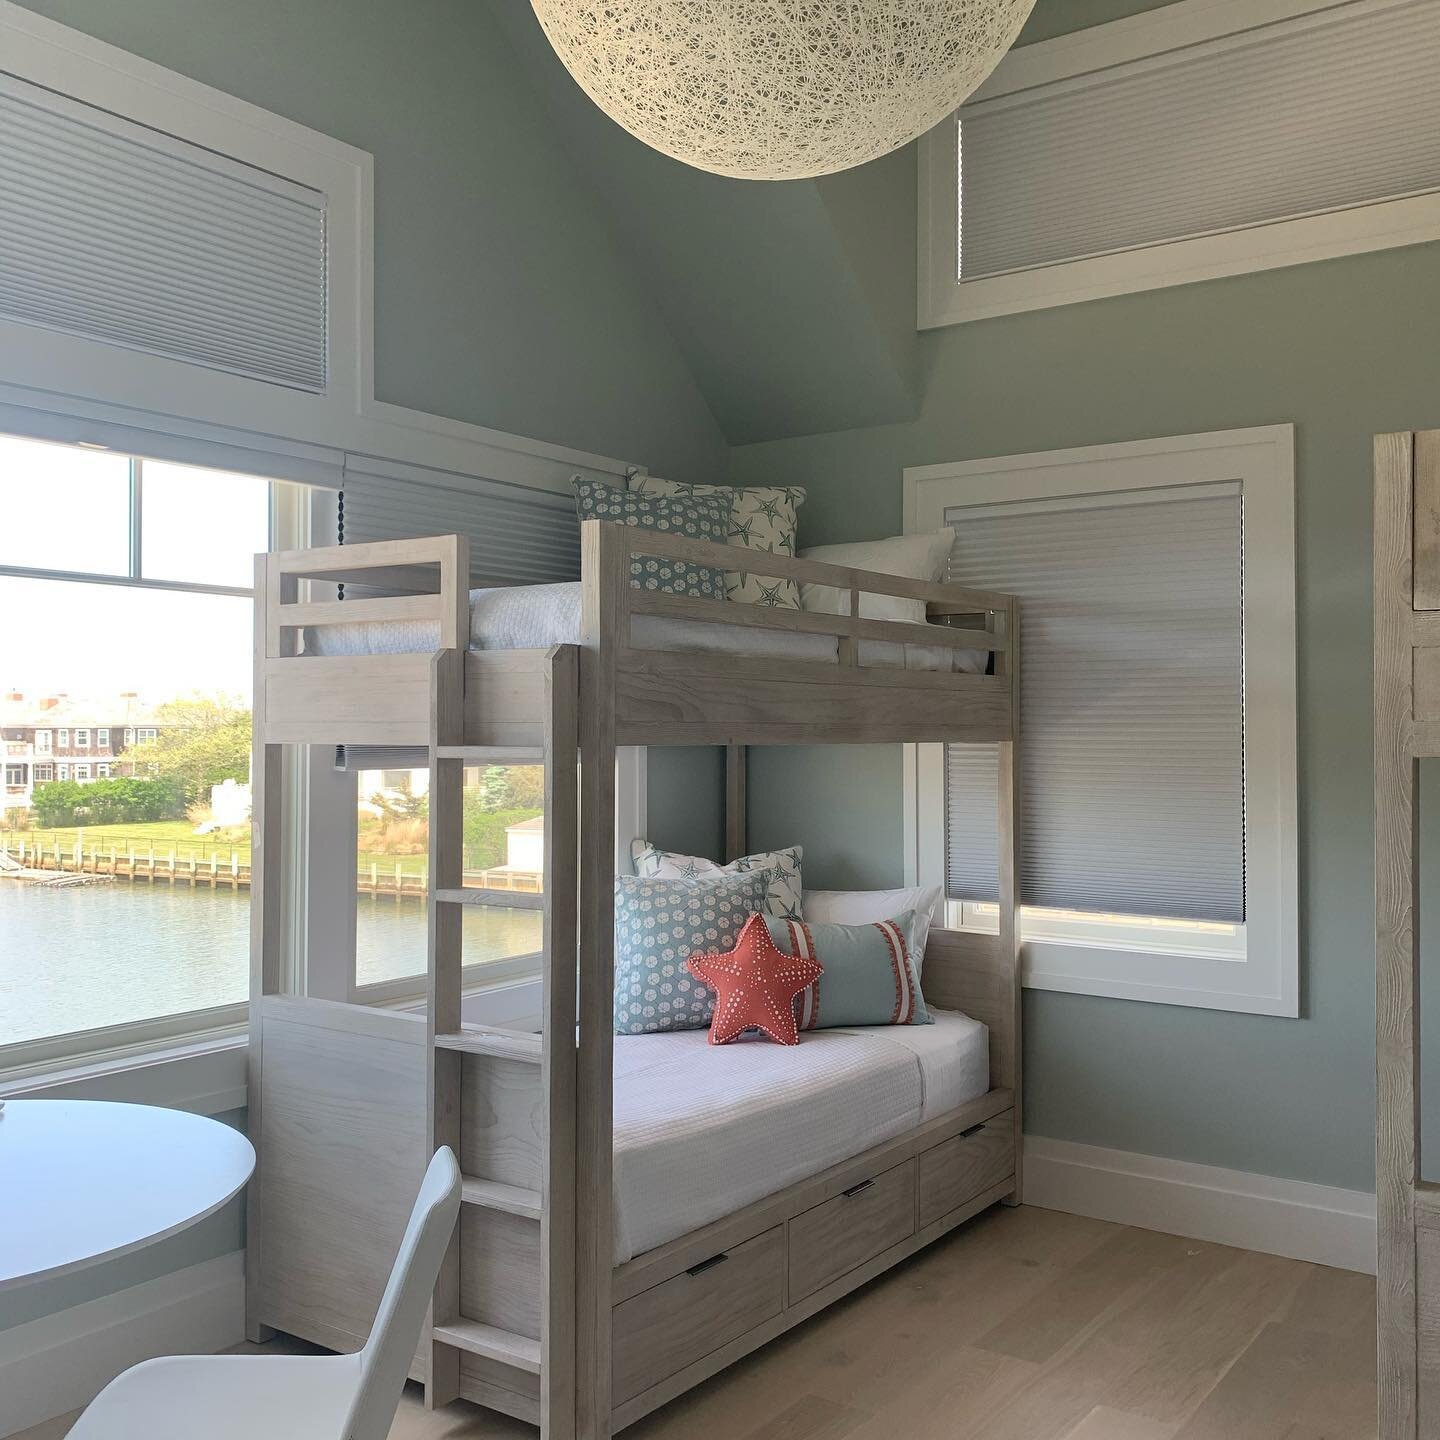 Cute as can be twin girls bedroom!
#styledandsold #waterfronthomes #hamptonsdesigner #luxurydesign #newconstruction